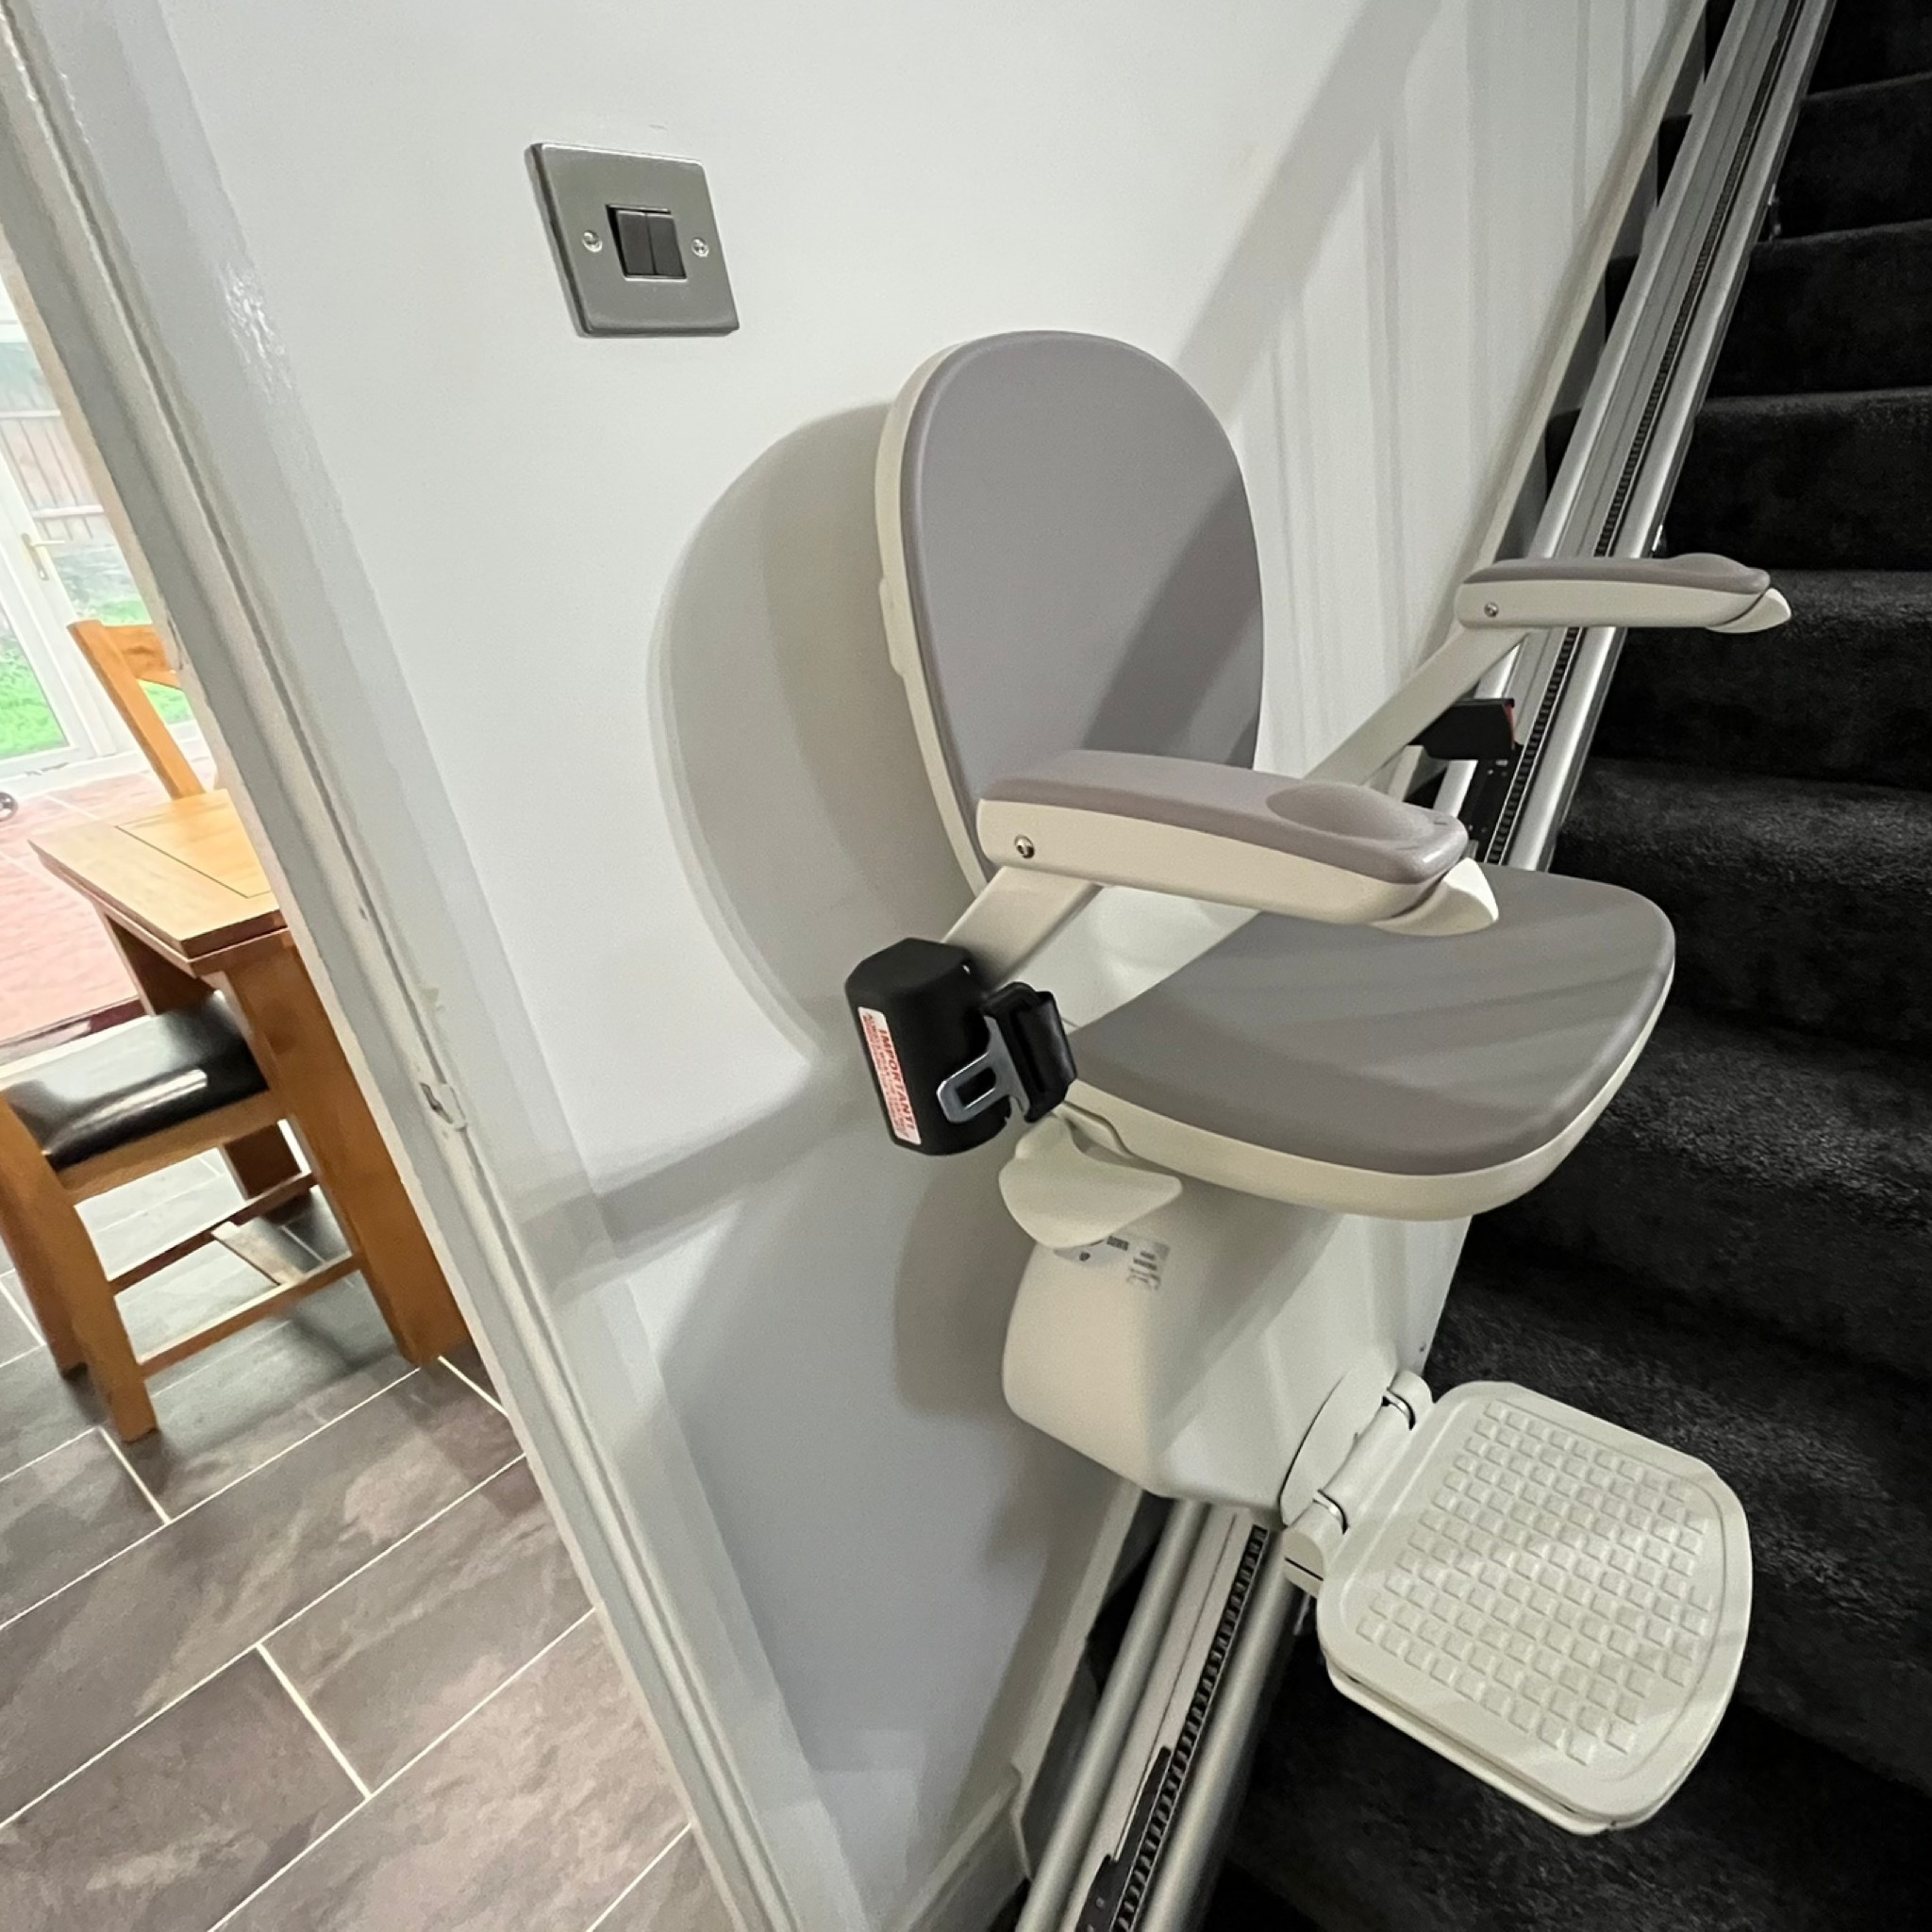 acorn straight stairlift by carelift services